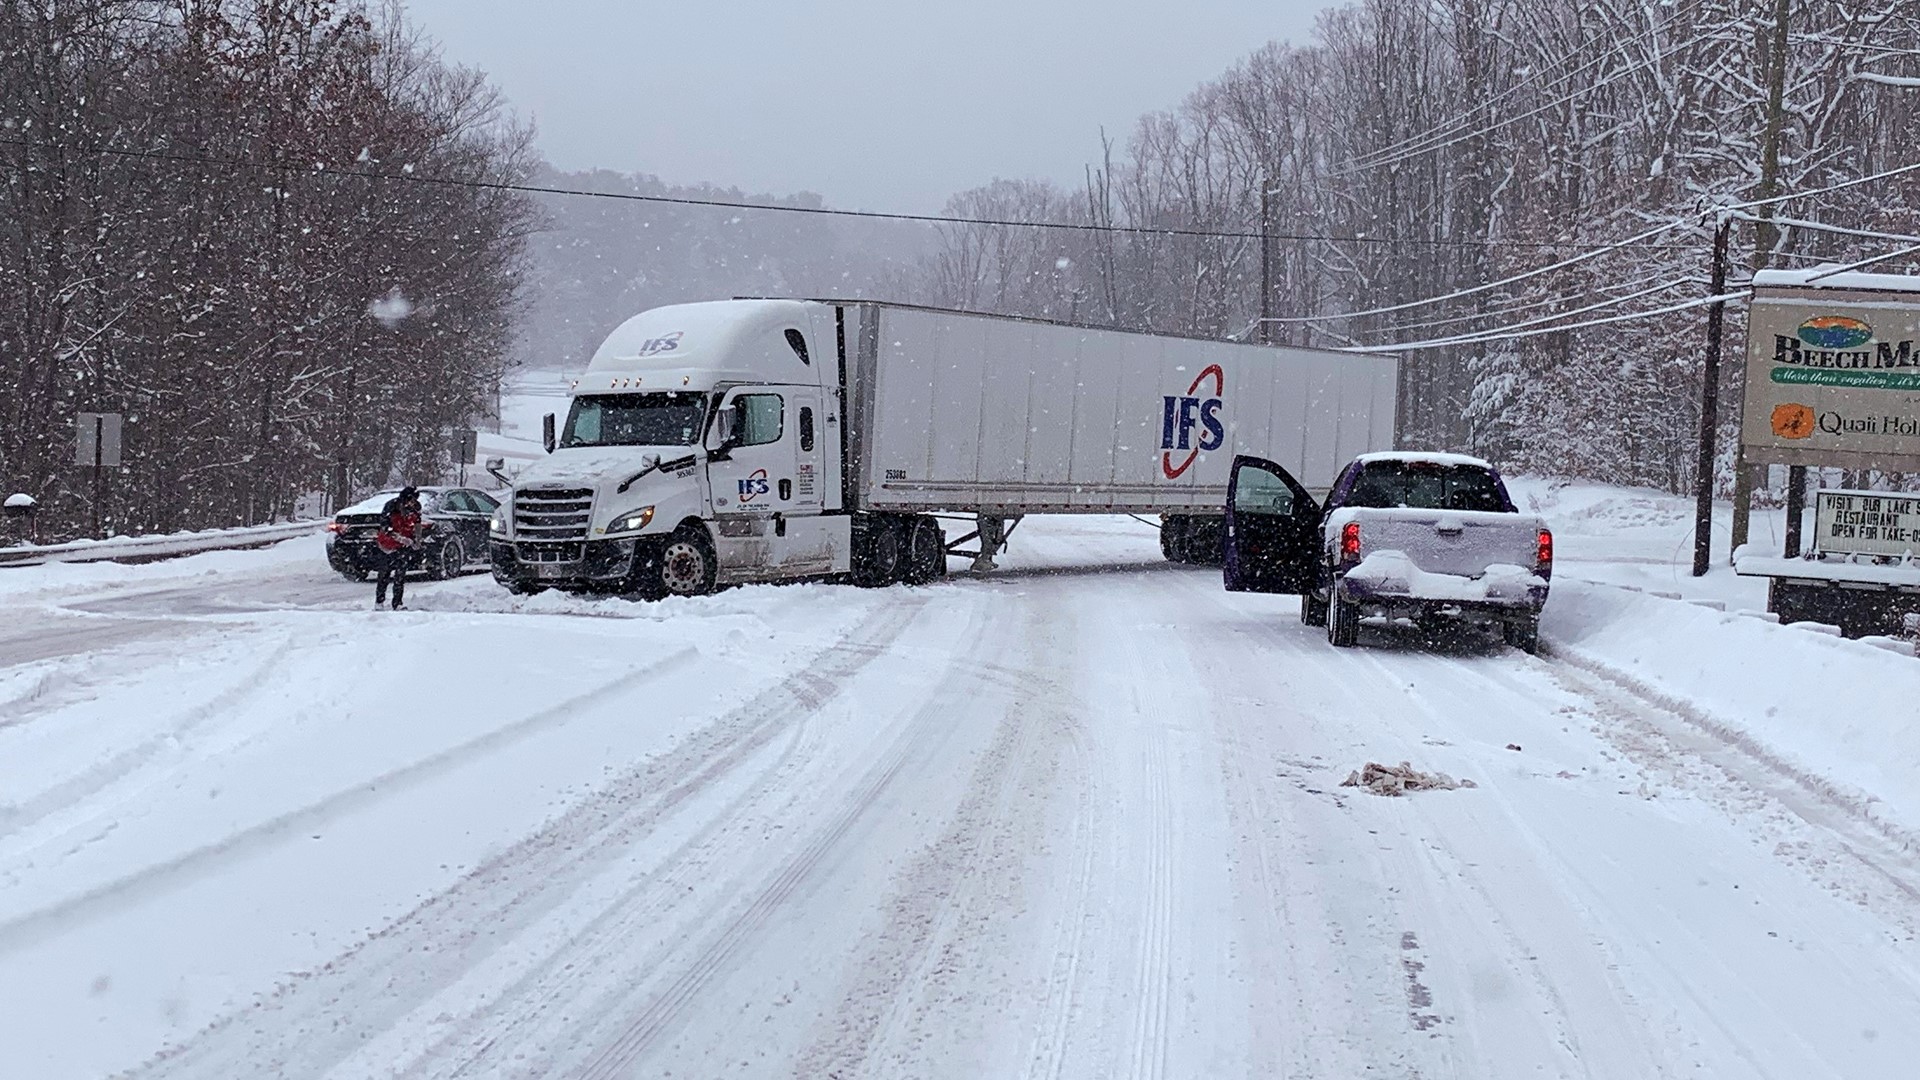 Drivers faced a slow go on most roads in our area Monday afternoon.